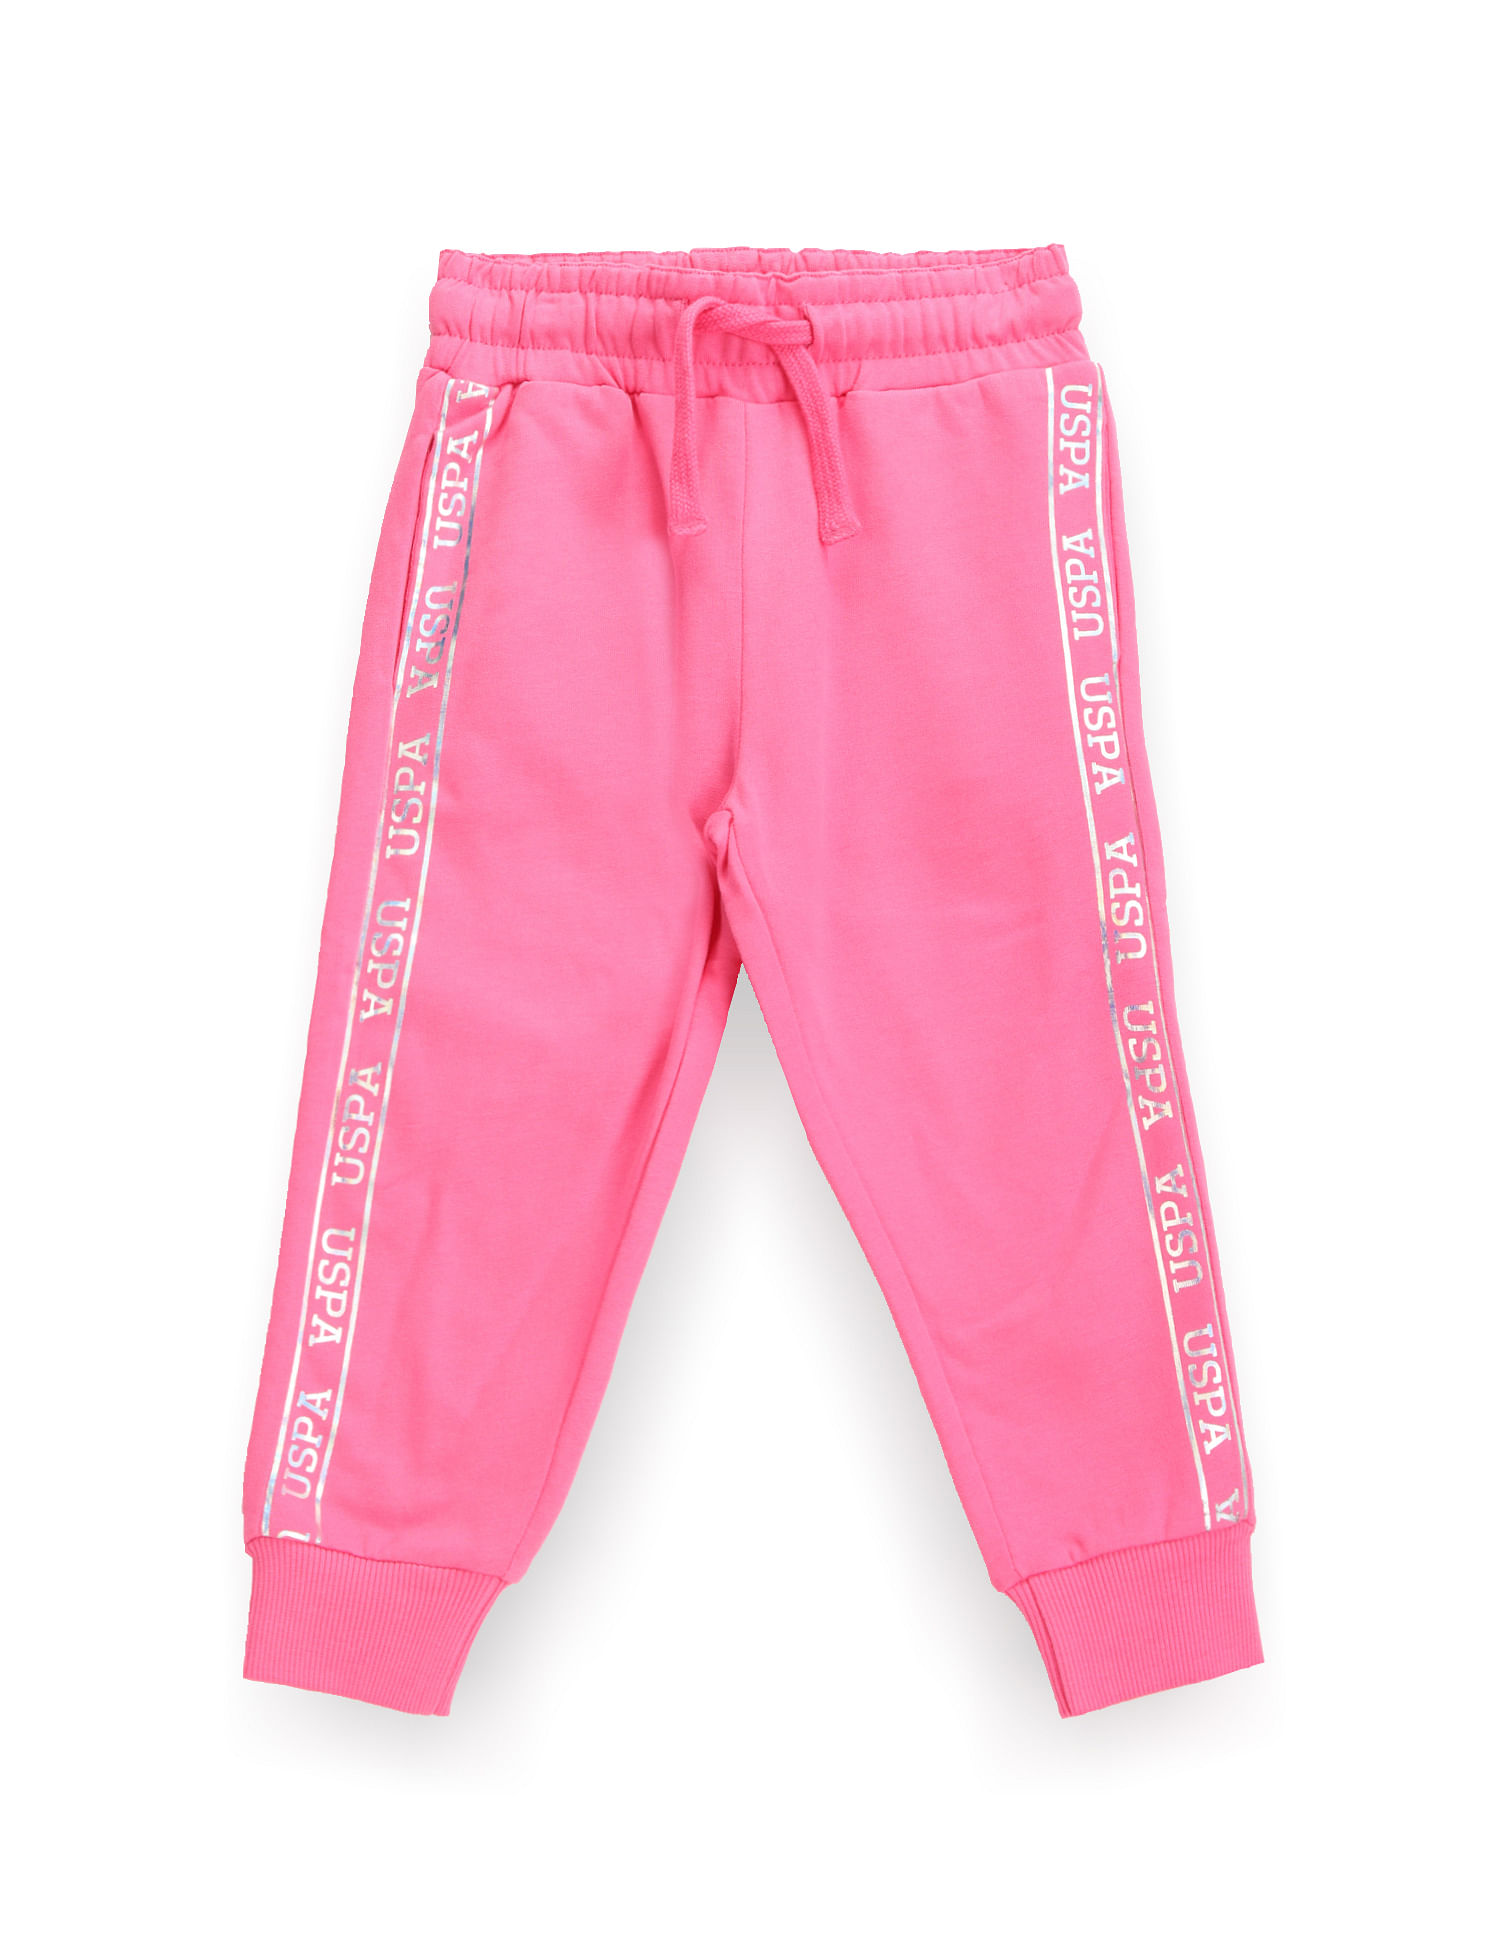 Beverly Hills Polo Club Joggers & Track Pants for Girls sale - discounted  price | FASHIOLA INDIA